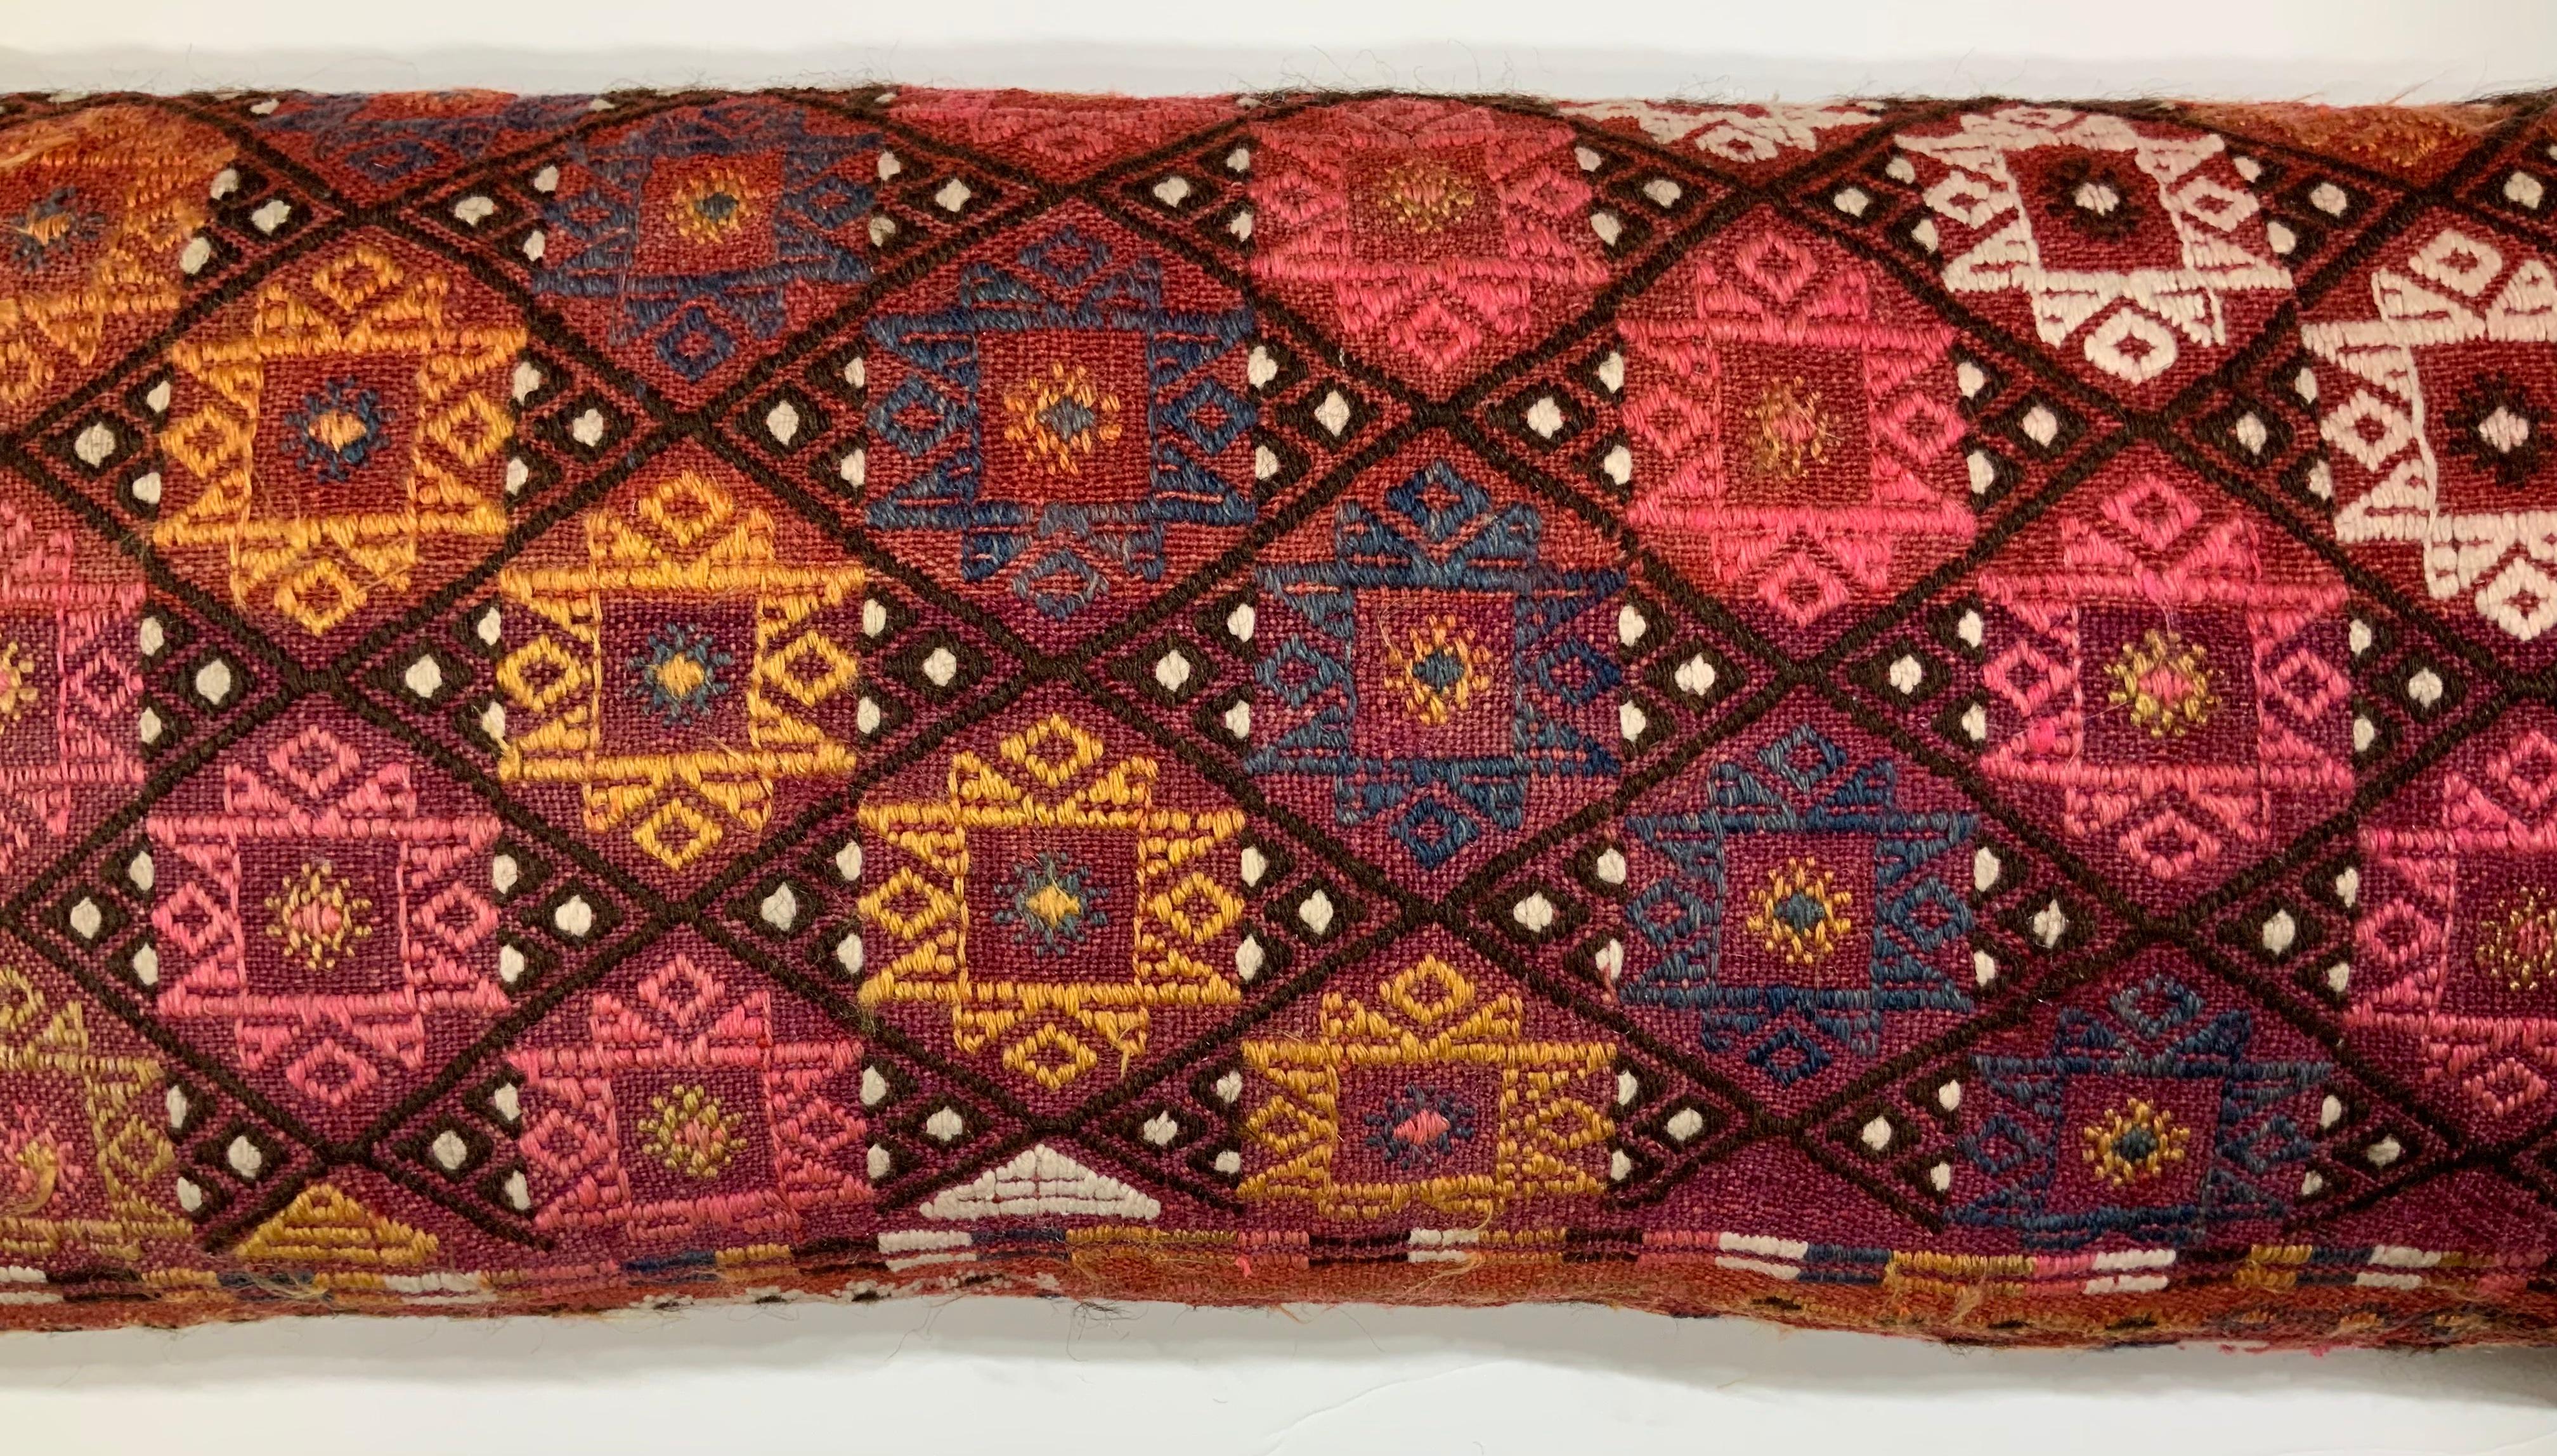 Late 20th Century Single Two Side Hand Embroidery Pillow